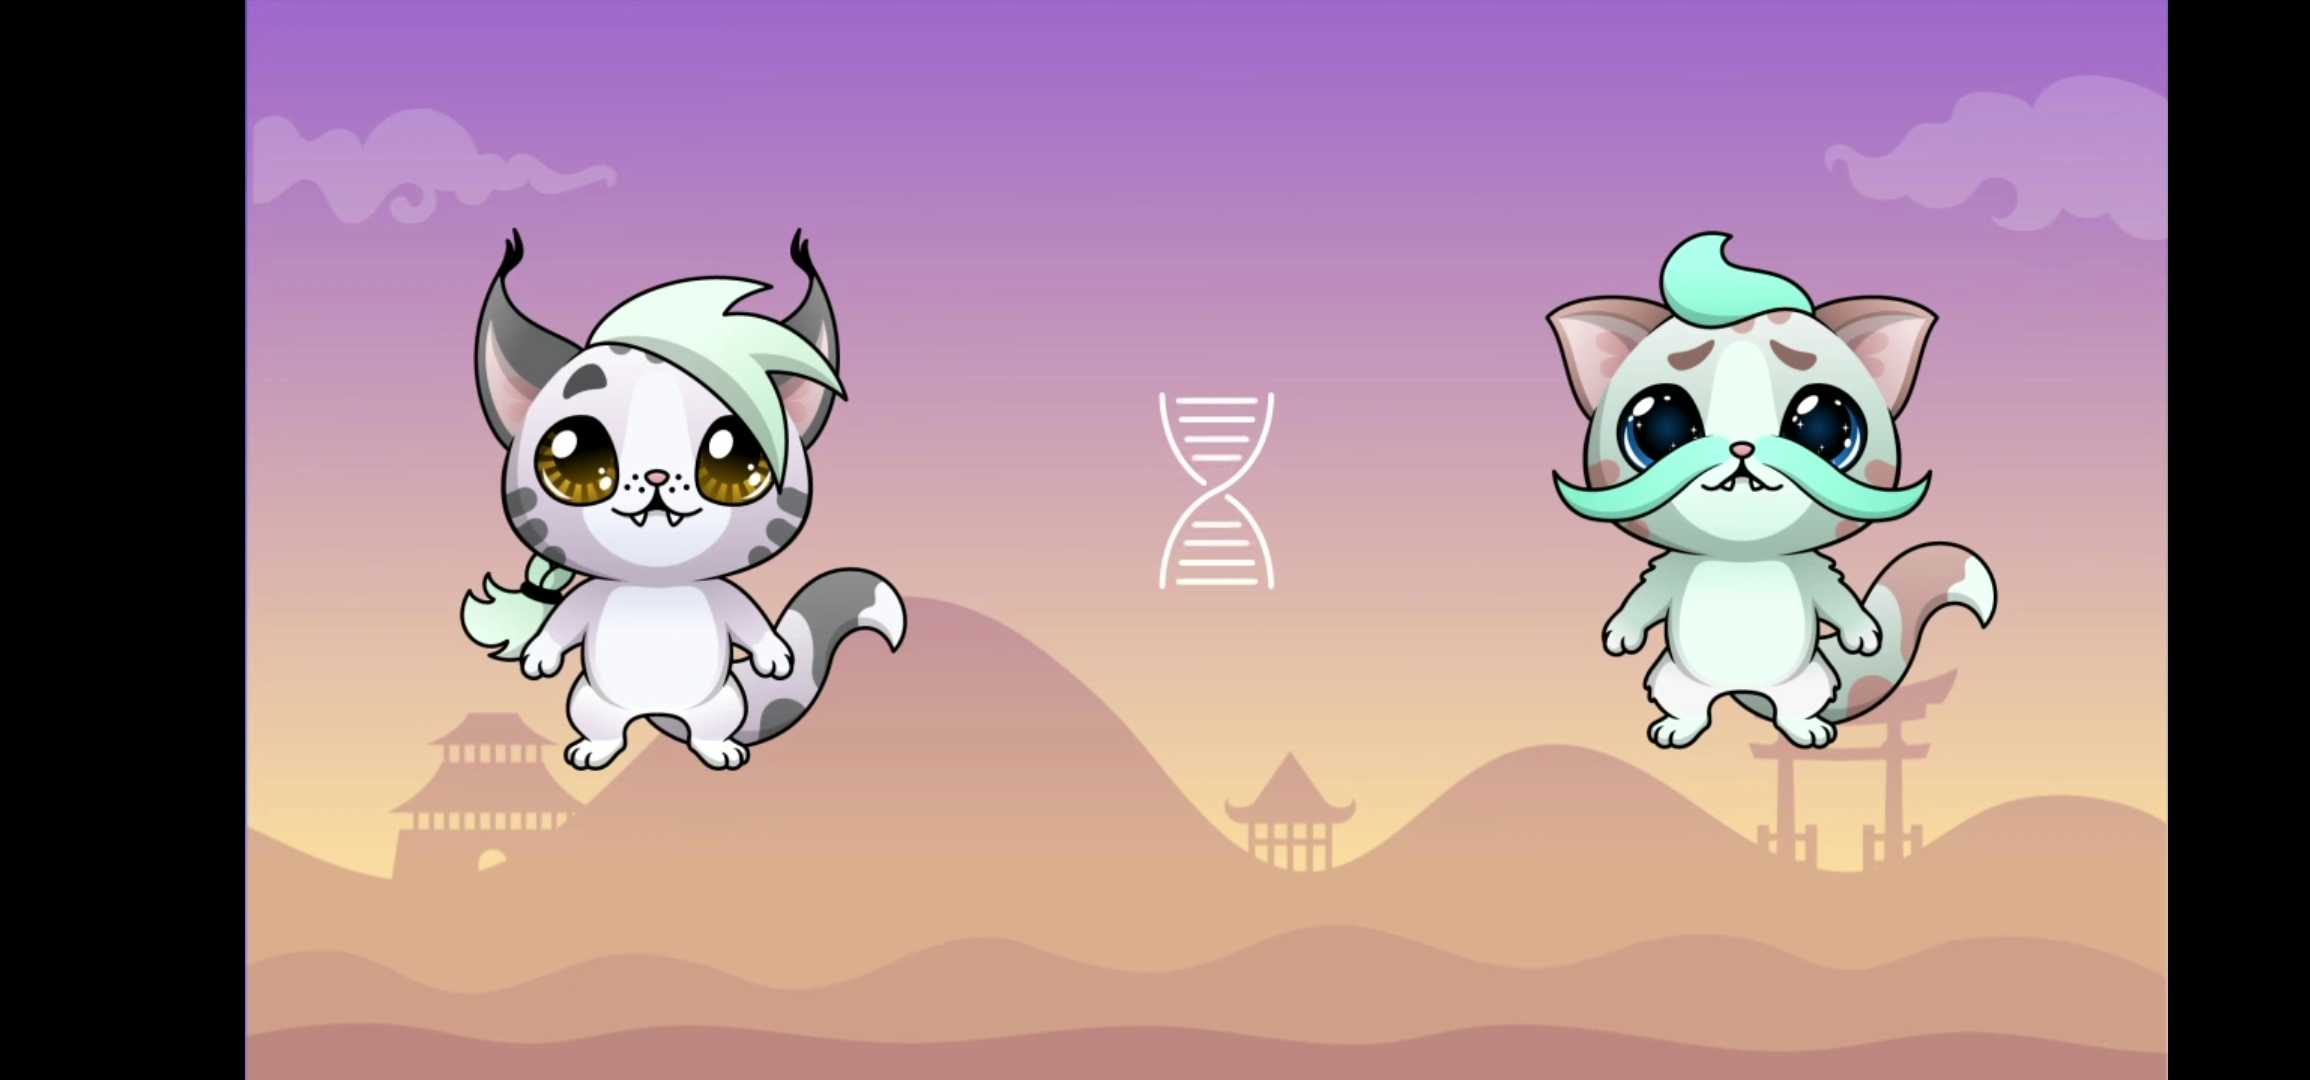 game image from Blockchain Cuties